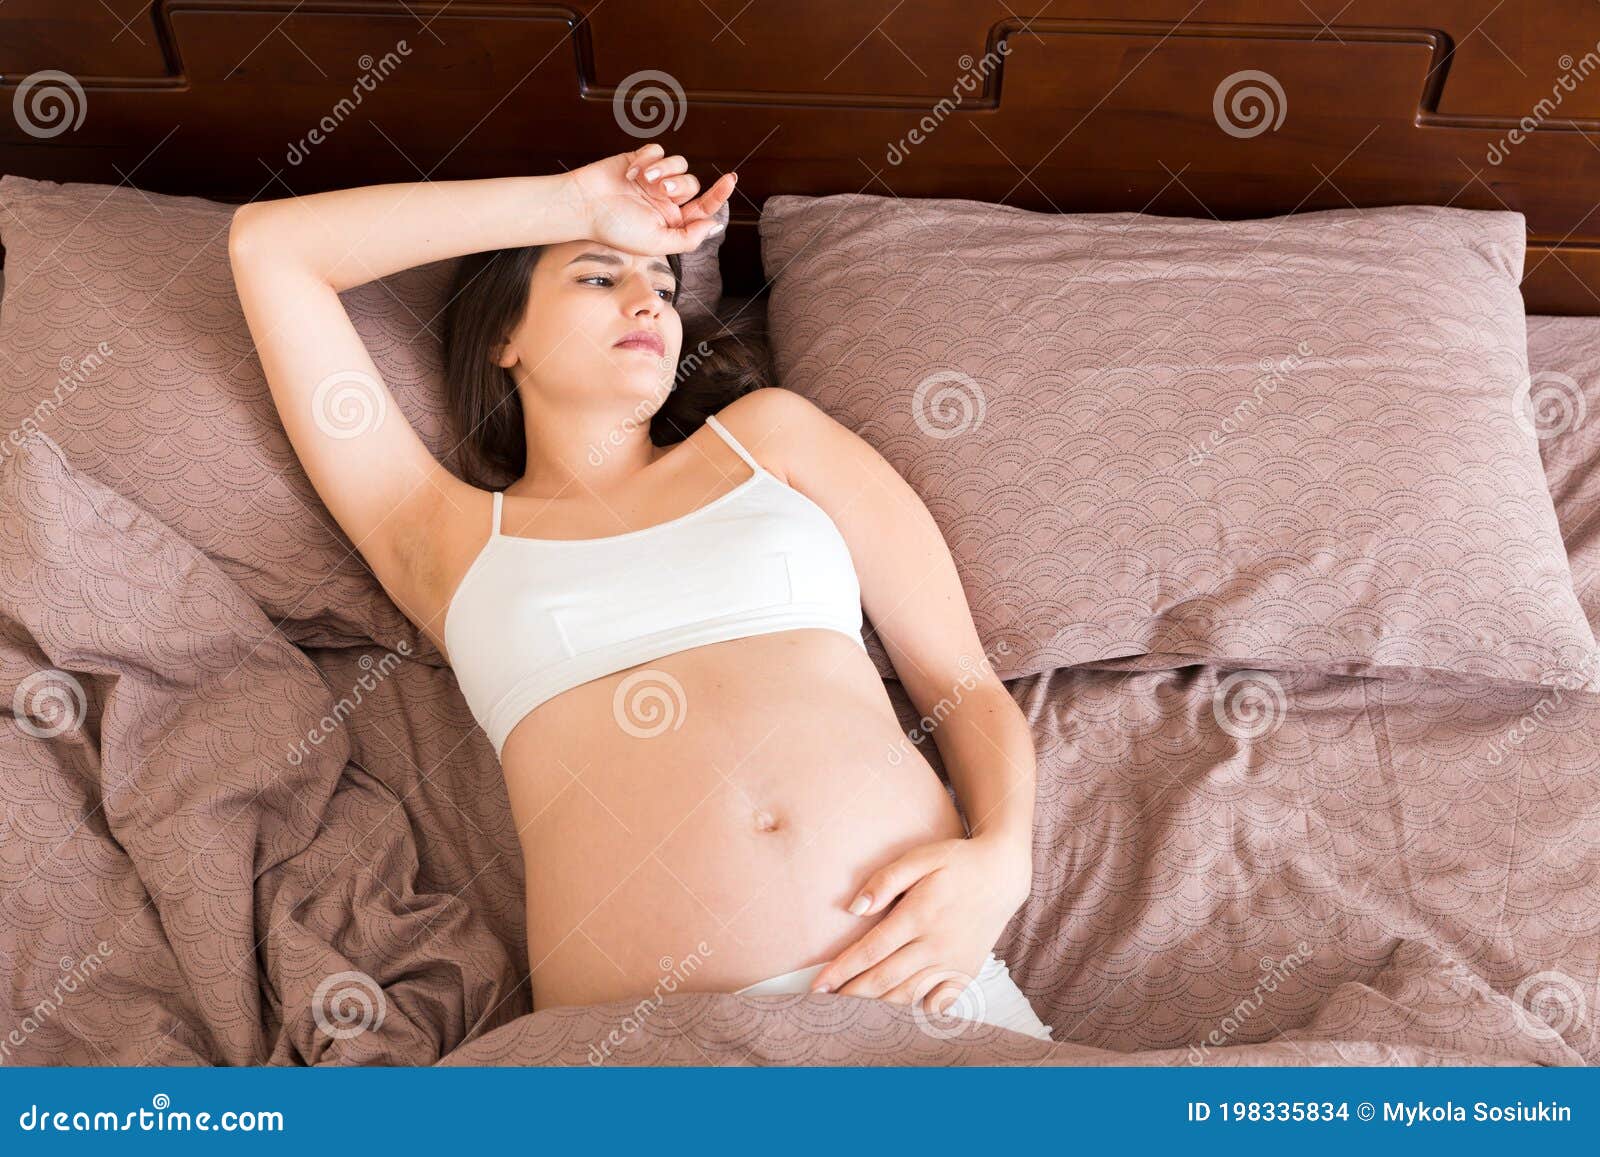 Beautiful Young Pregnant Woman Lying in Bed, Top View. the Girl ...